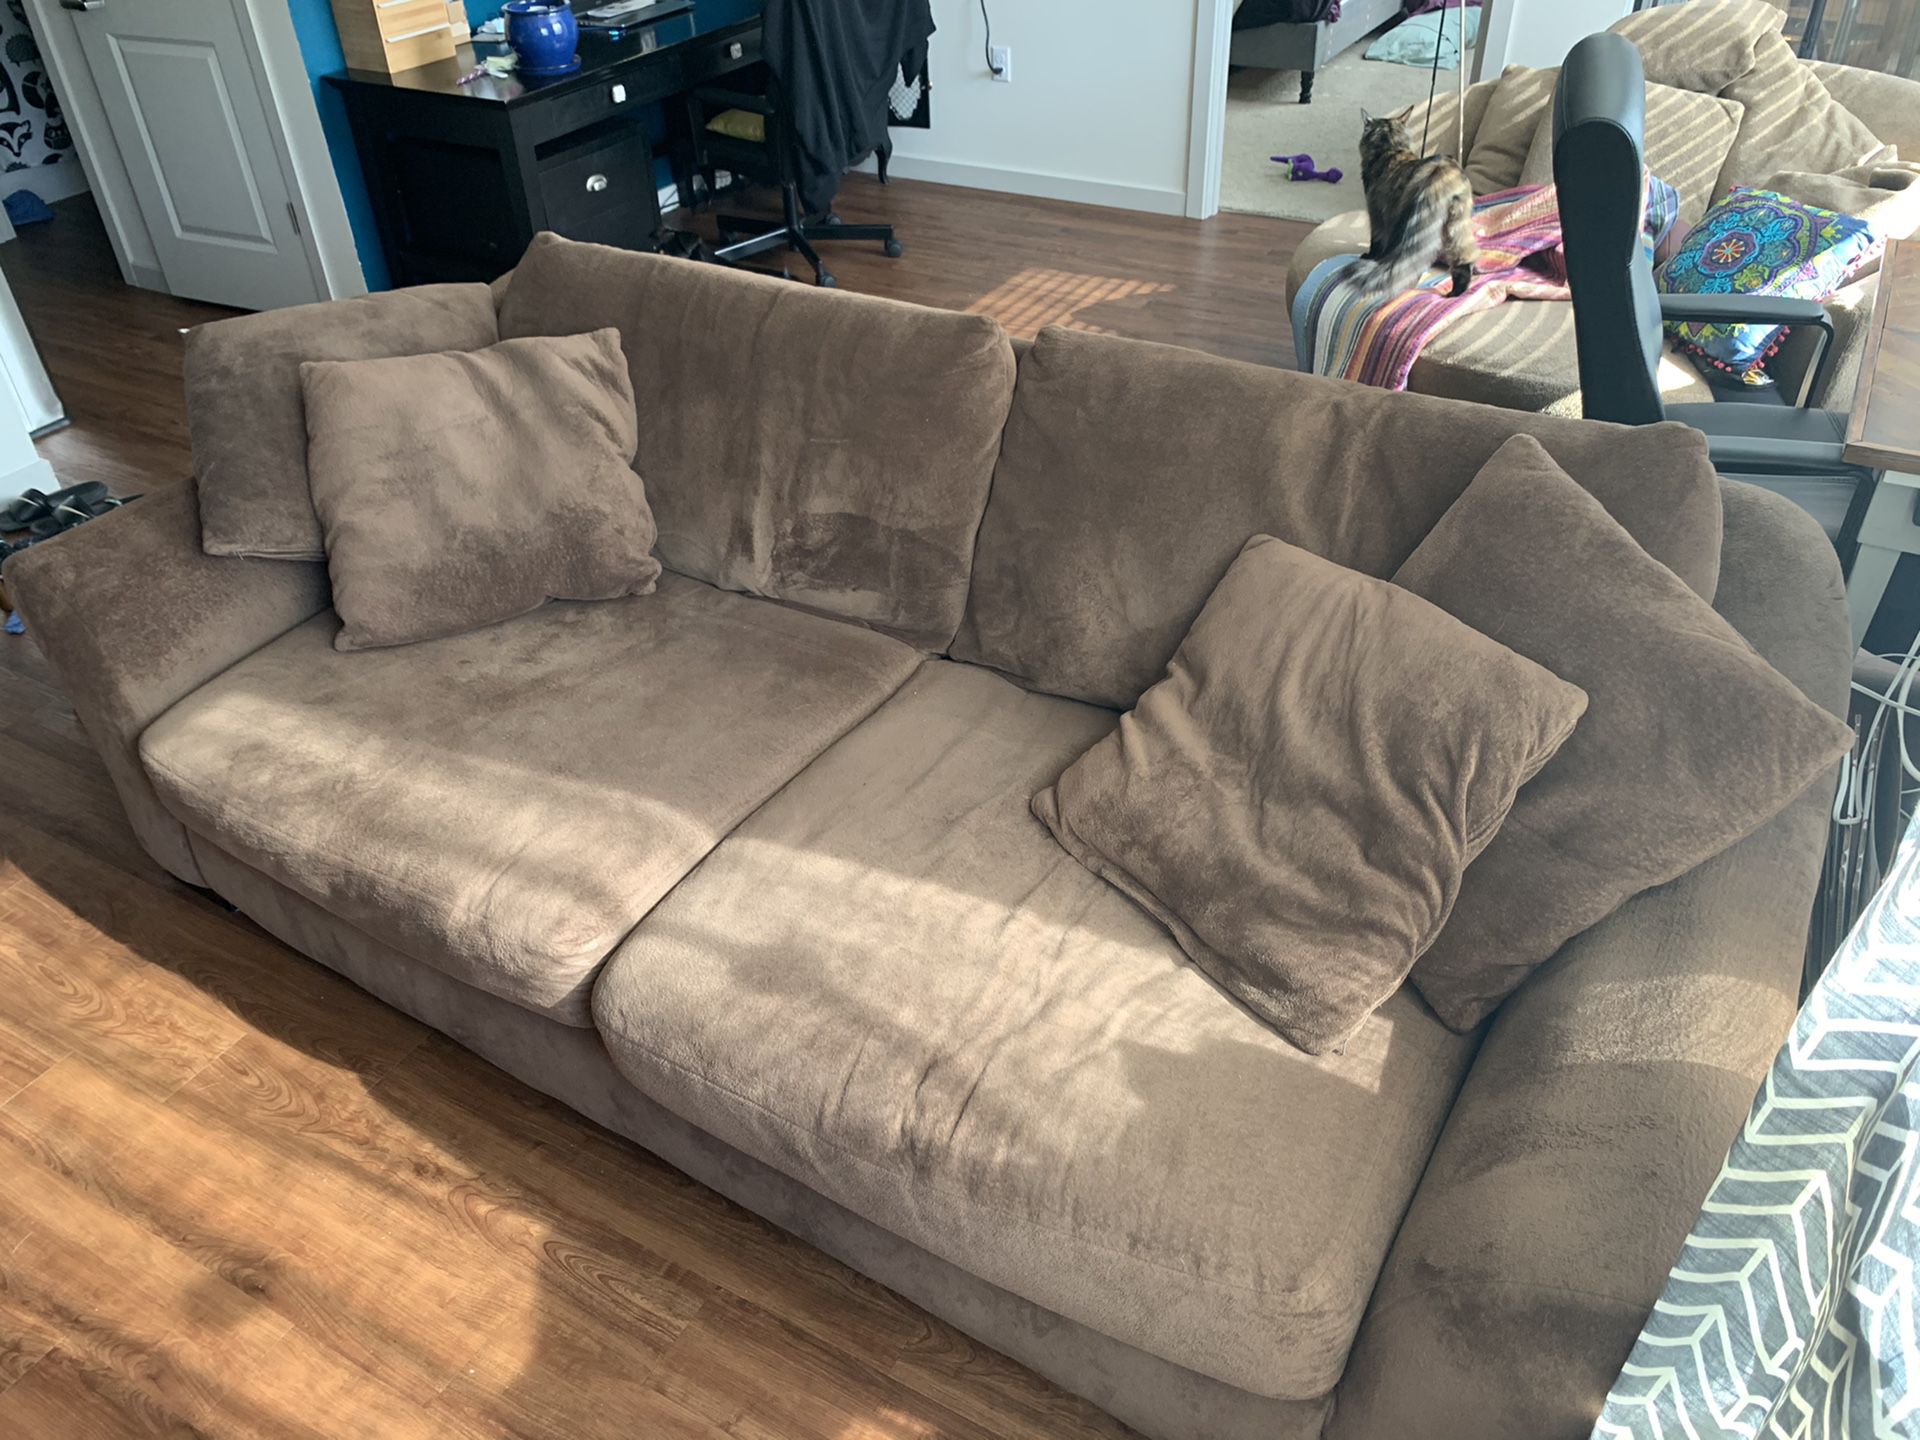 Oversized couch